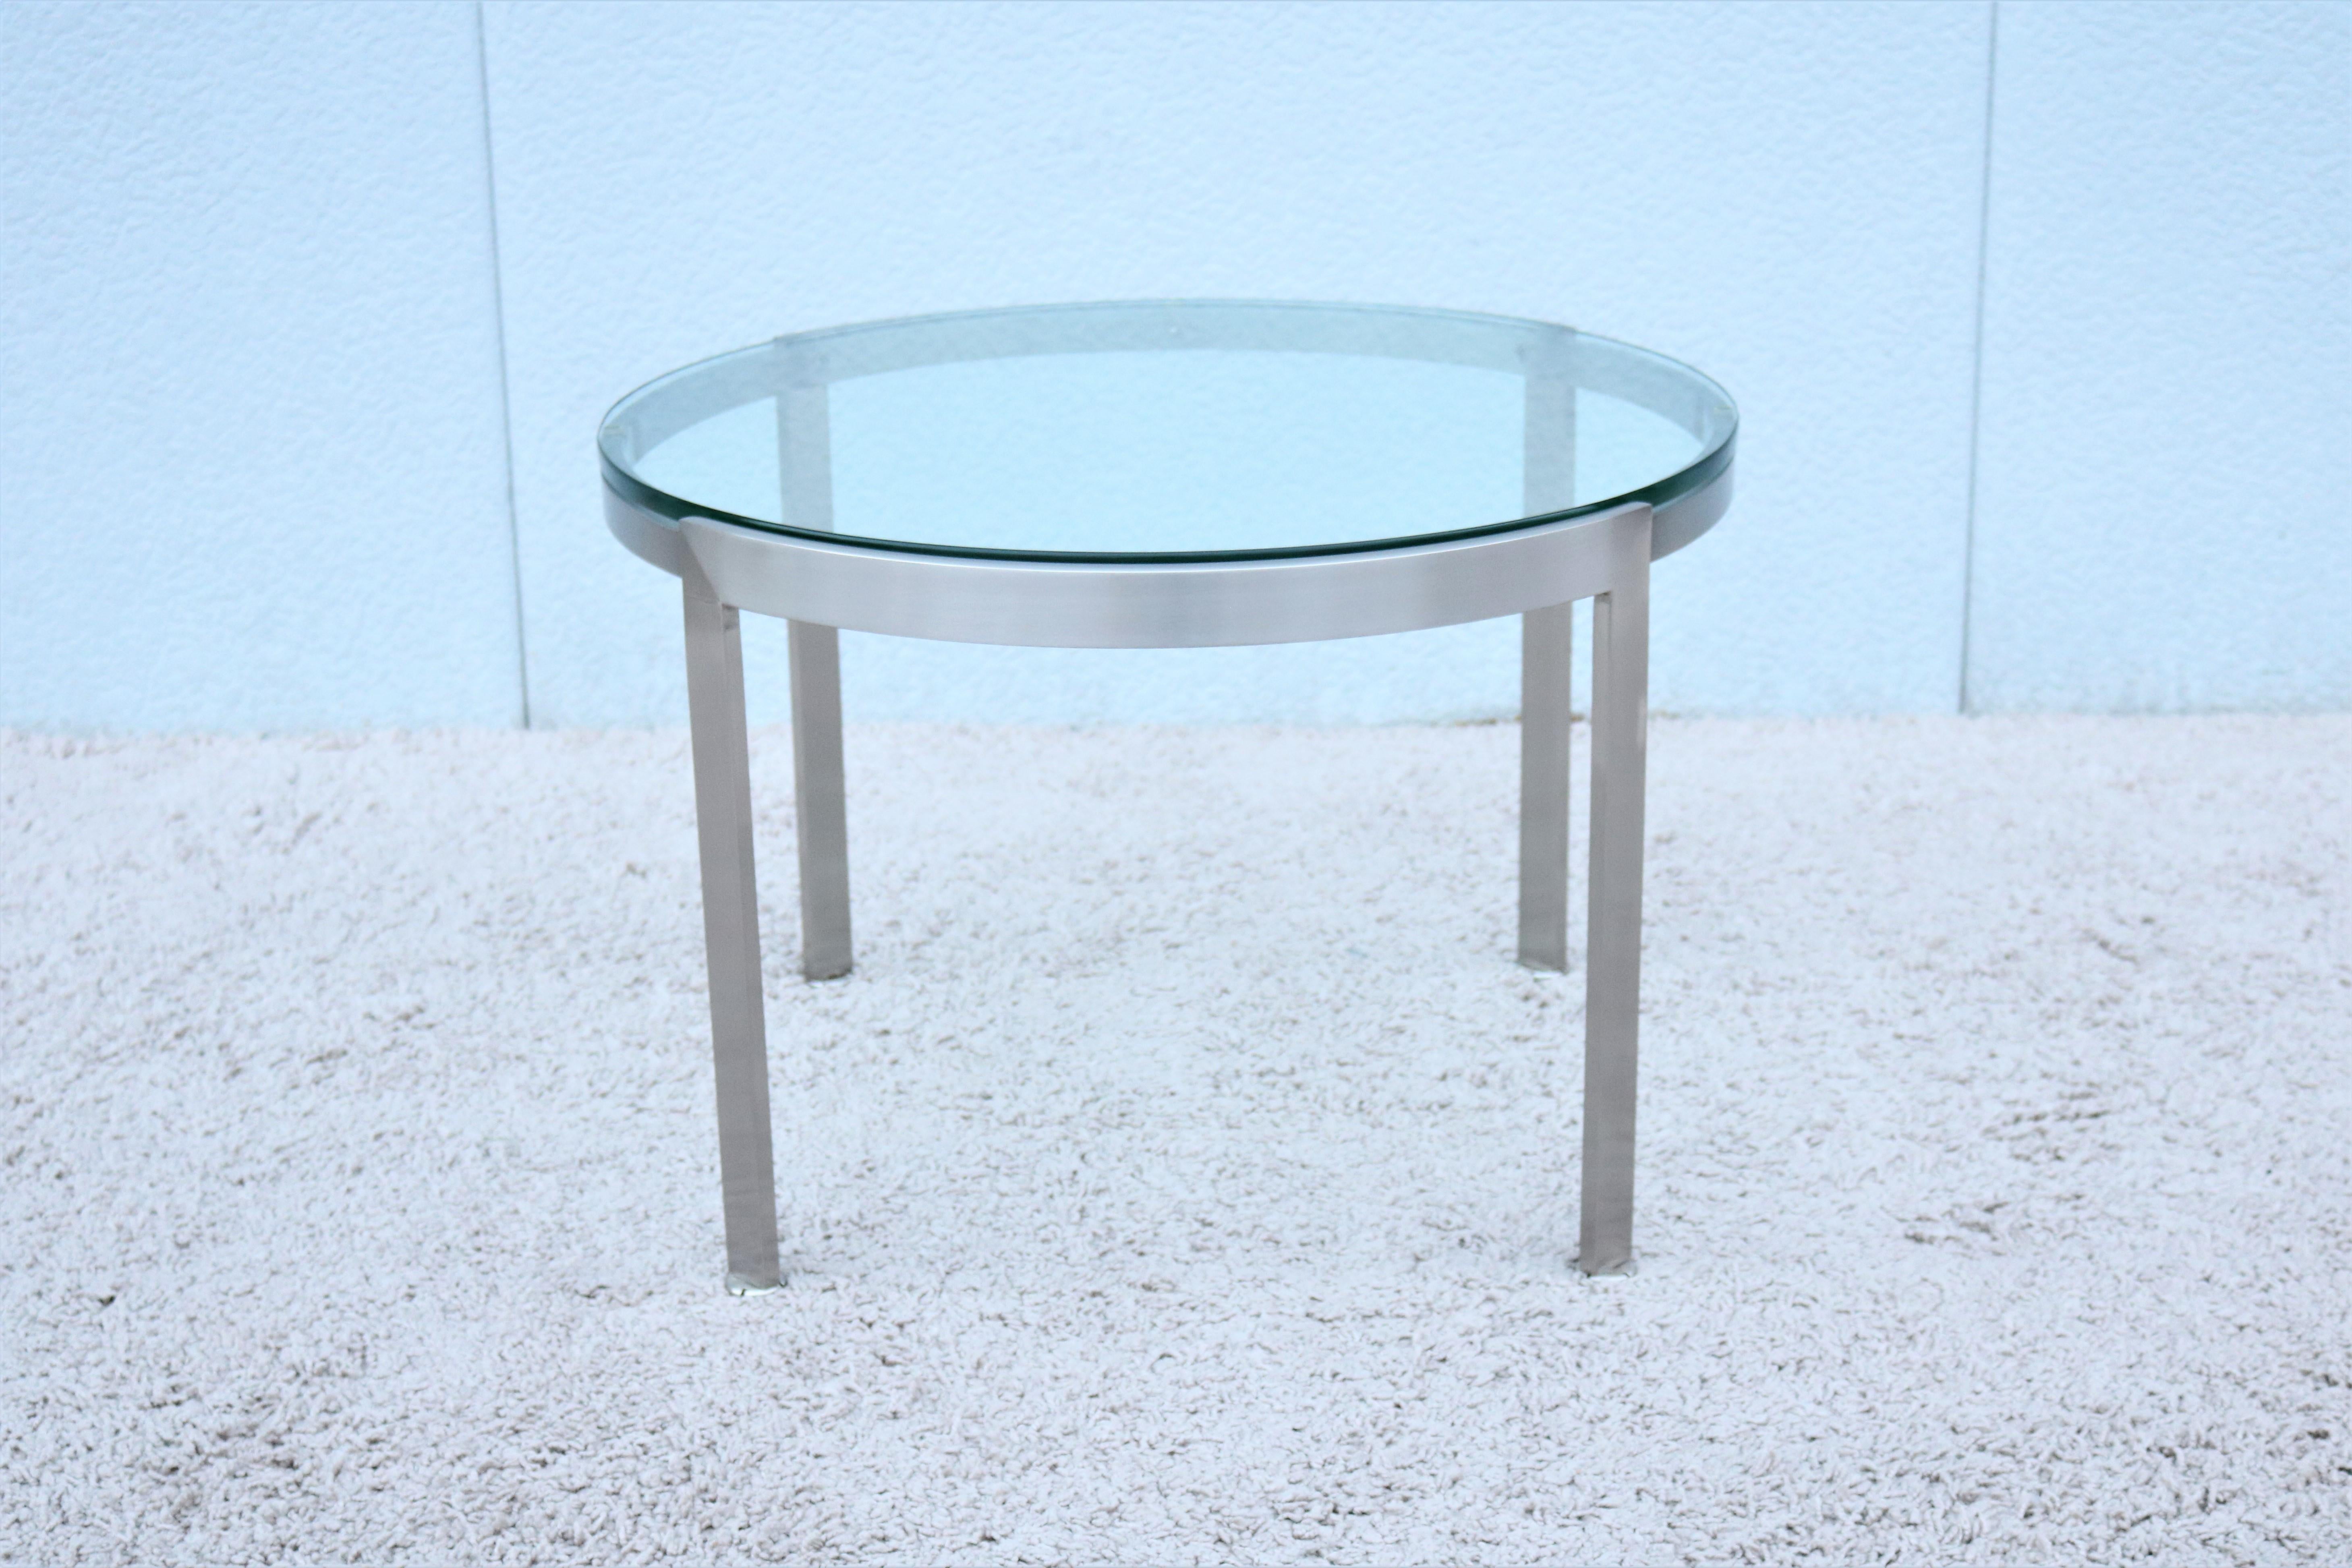 American Mid-Century Modern Style Geiger Metal Series Round Clear Glass Top Coffee Table For Sale